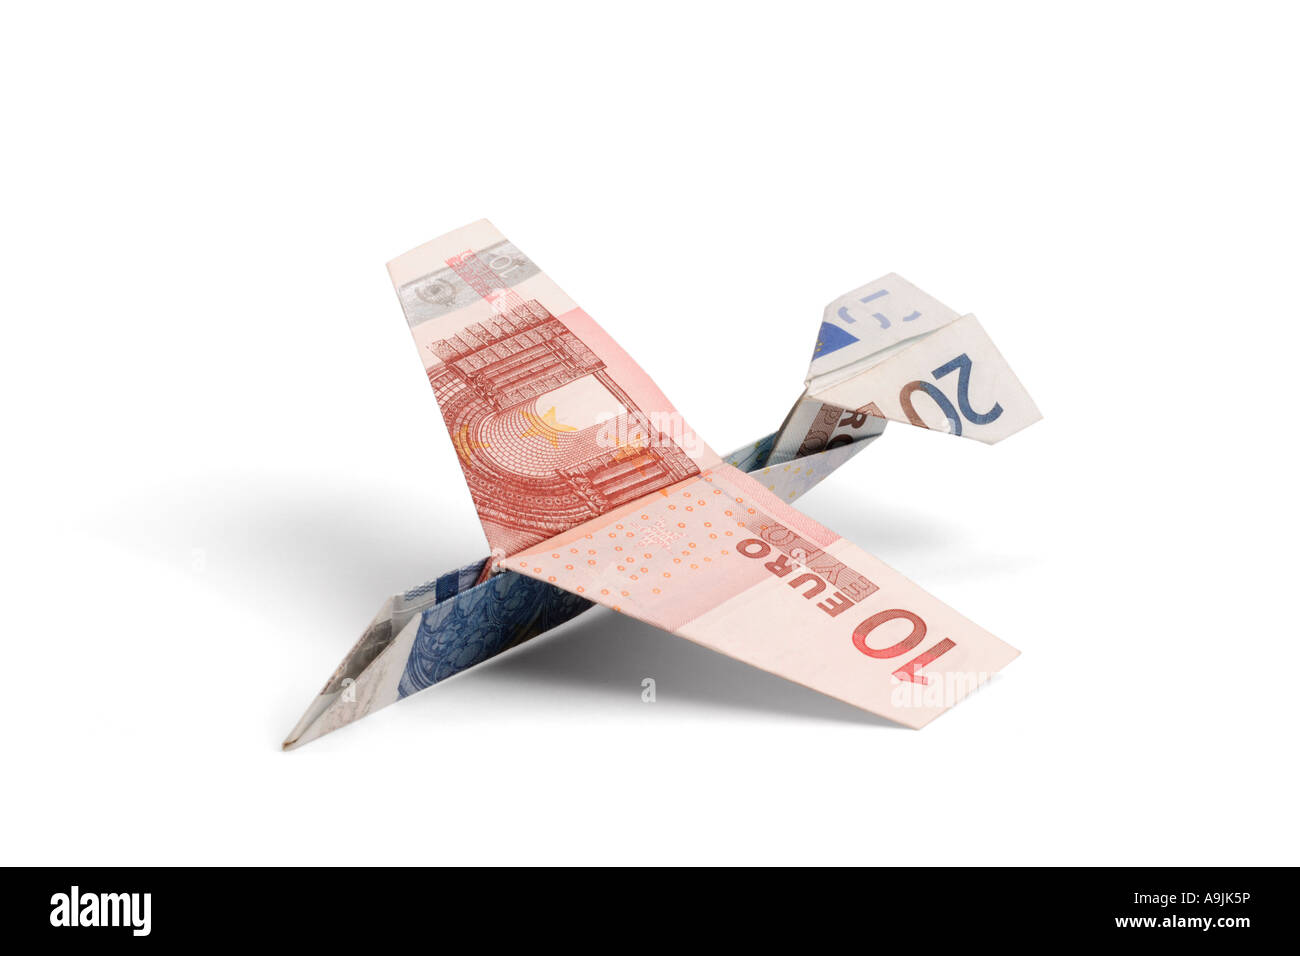 Airplane made of euro notes Stock Photo